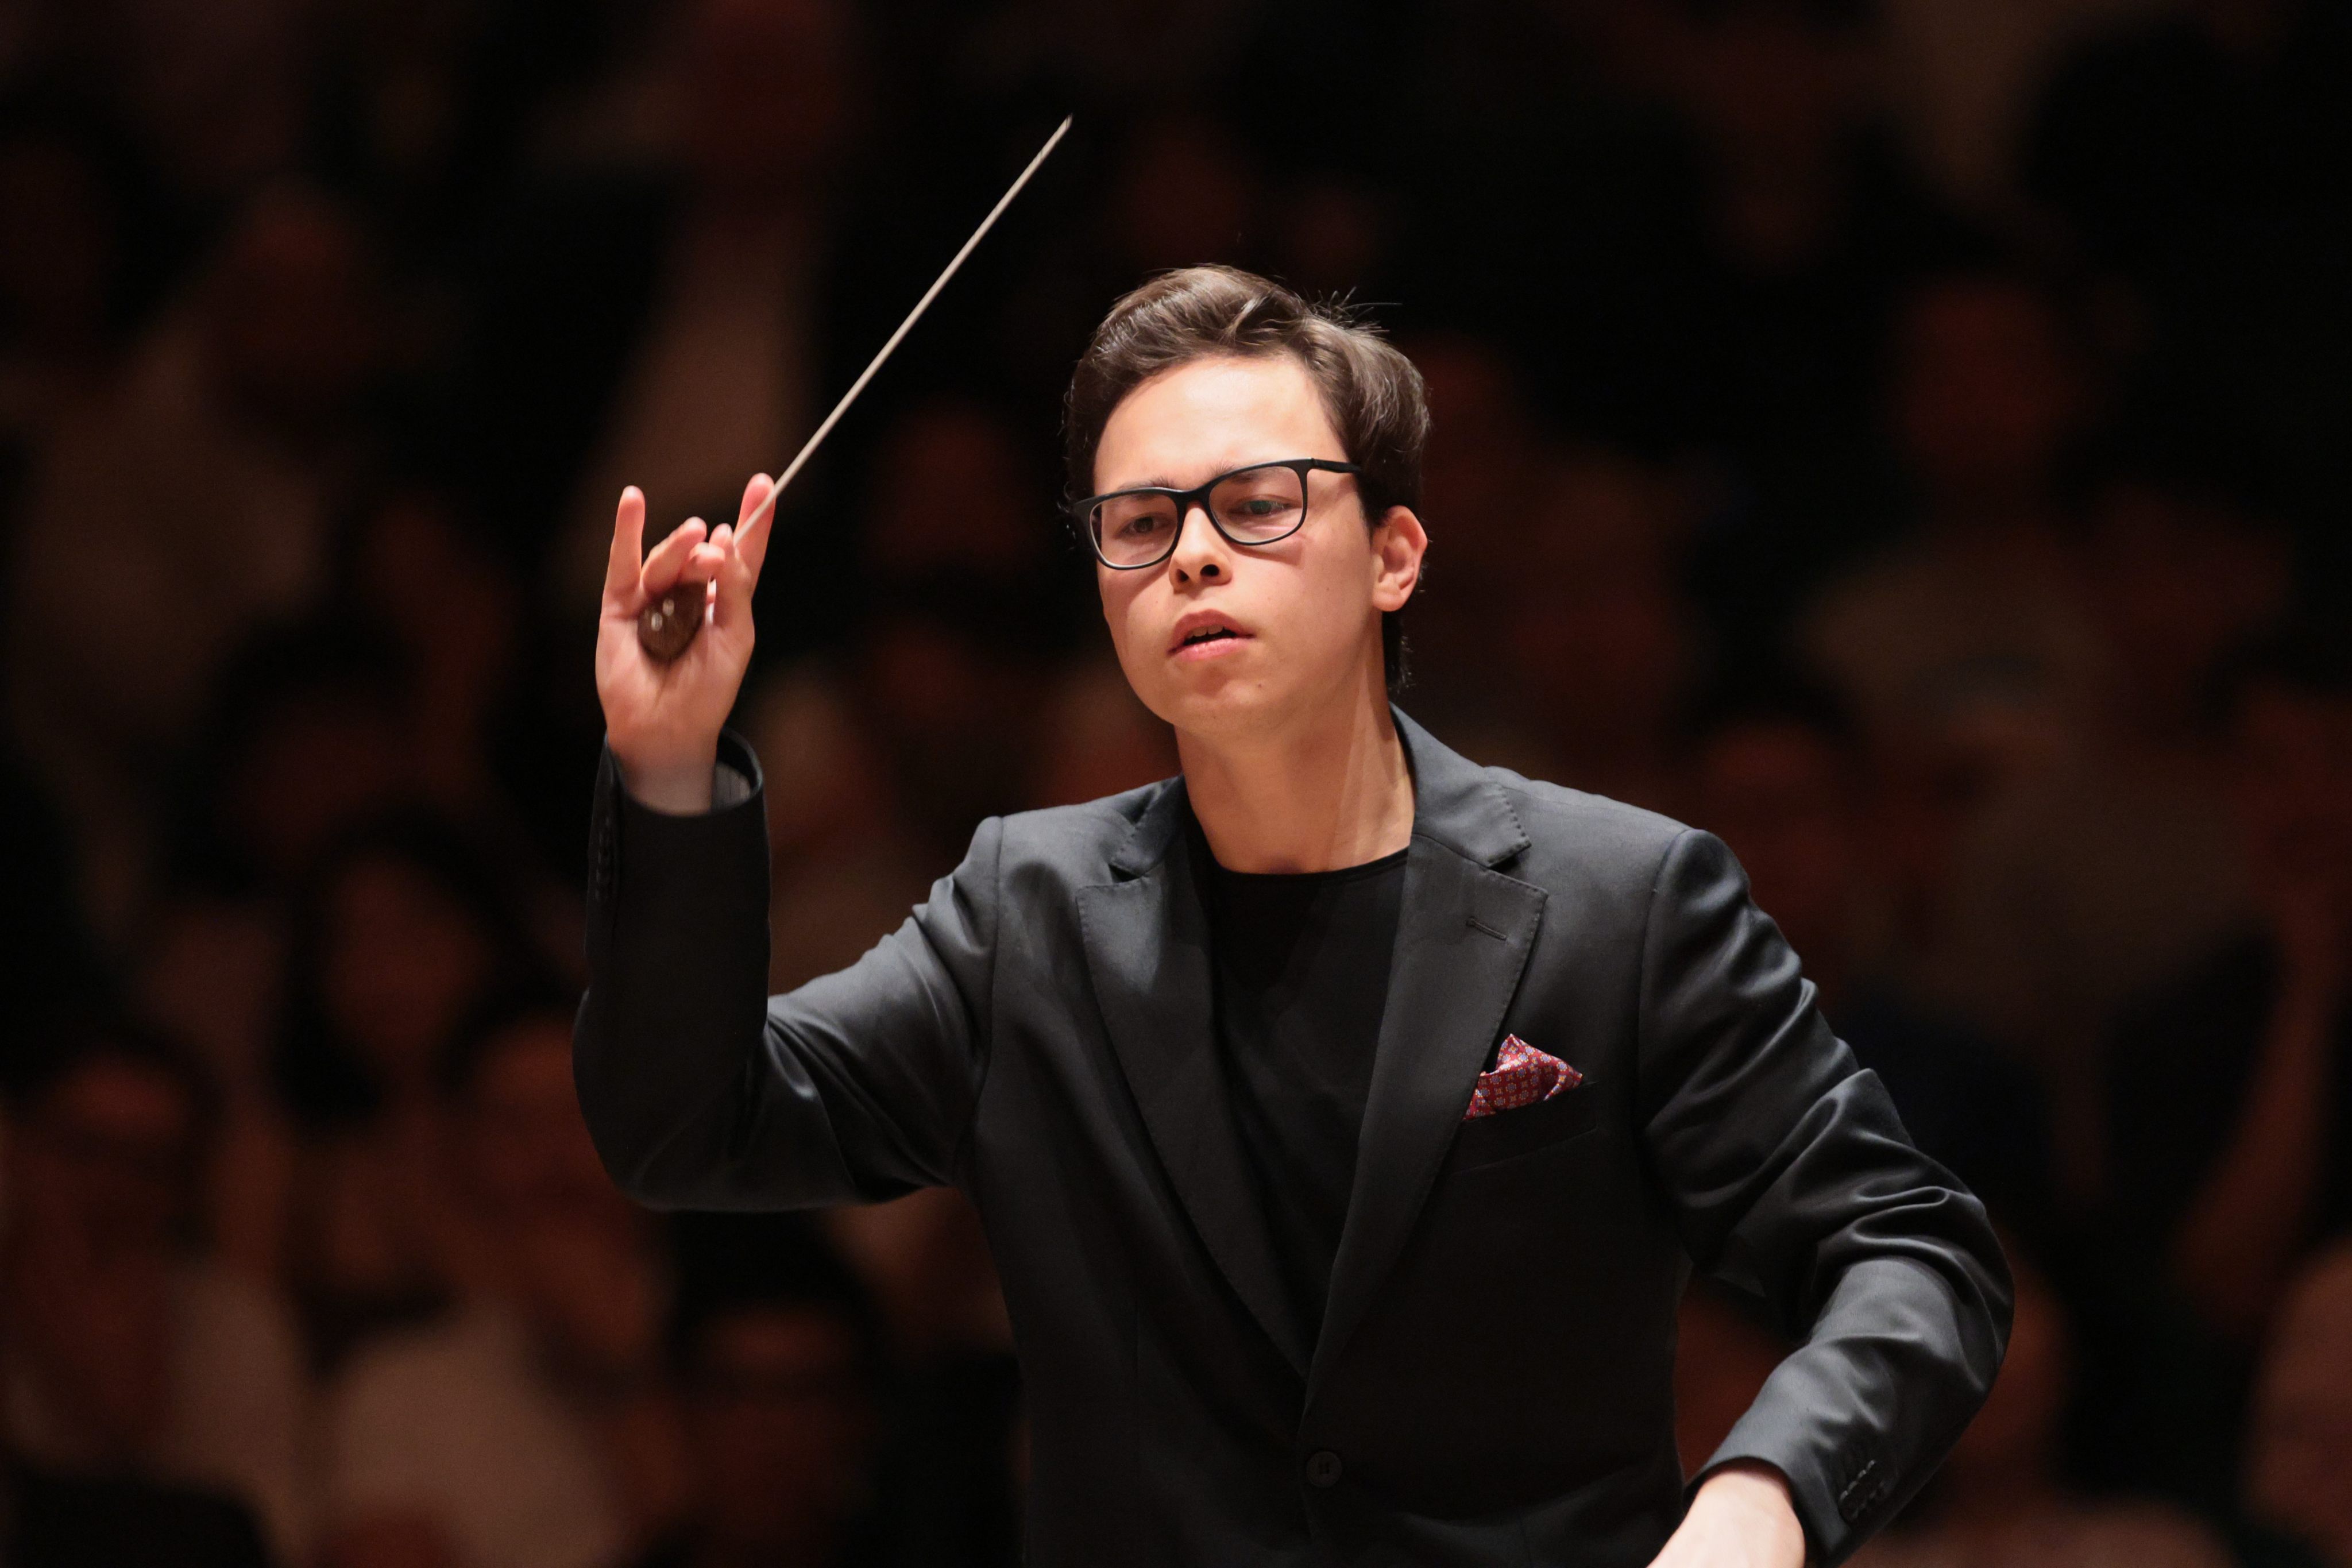 Tarmo Peltokoski conducts the Hong Kong Philharmonic Orchestra in its 2023/24 season finale concert on July 5. The incoming music director was received enthusiastically by the audience at the Hong Kong Cultural Centre Concert Hall. Photo: Keith Hiro/HK Phil